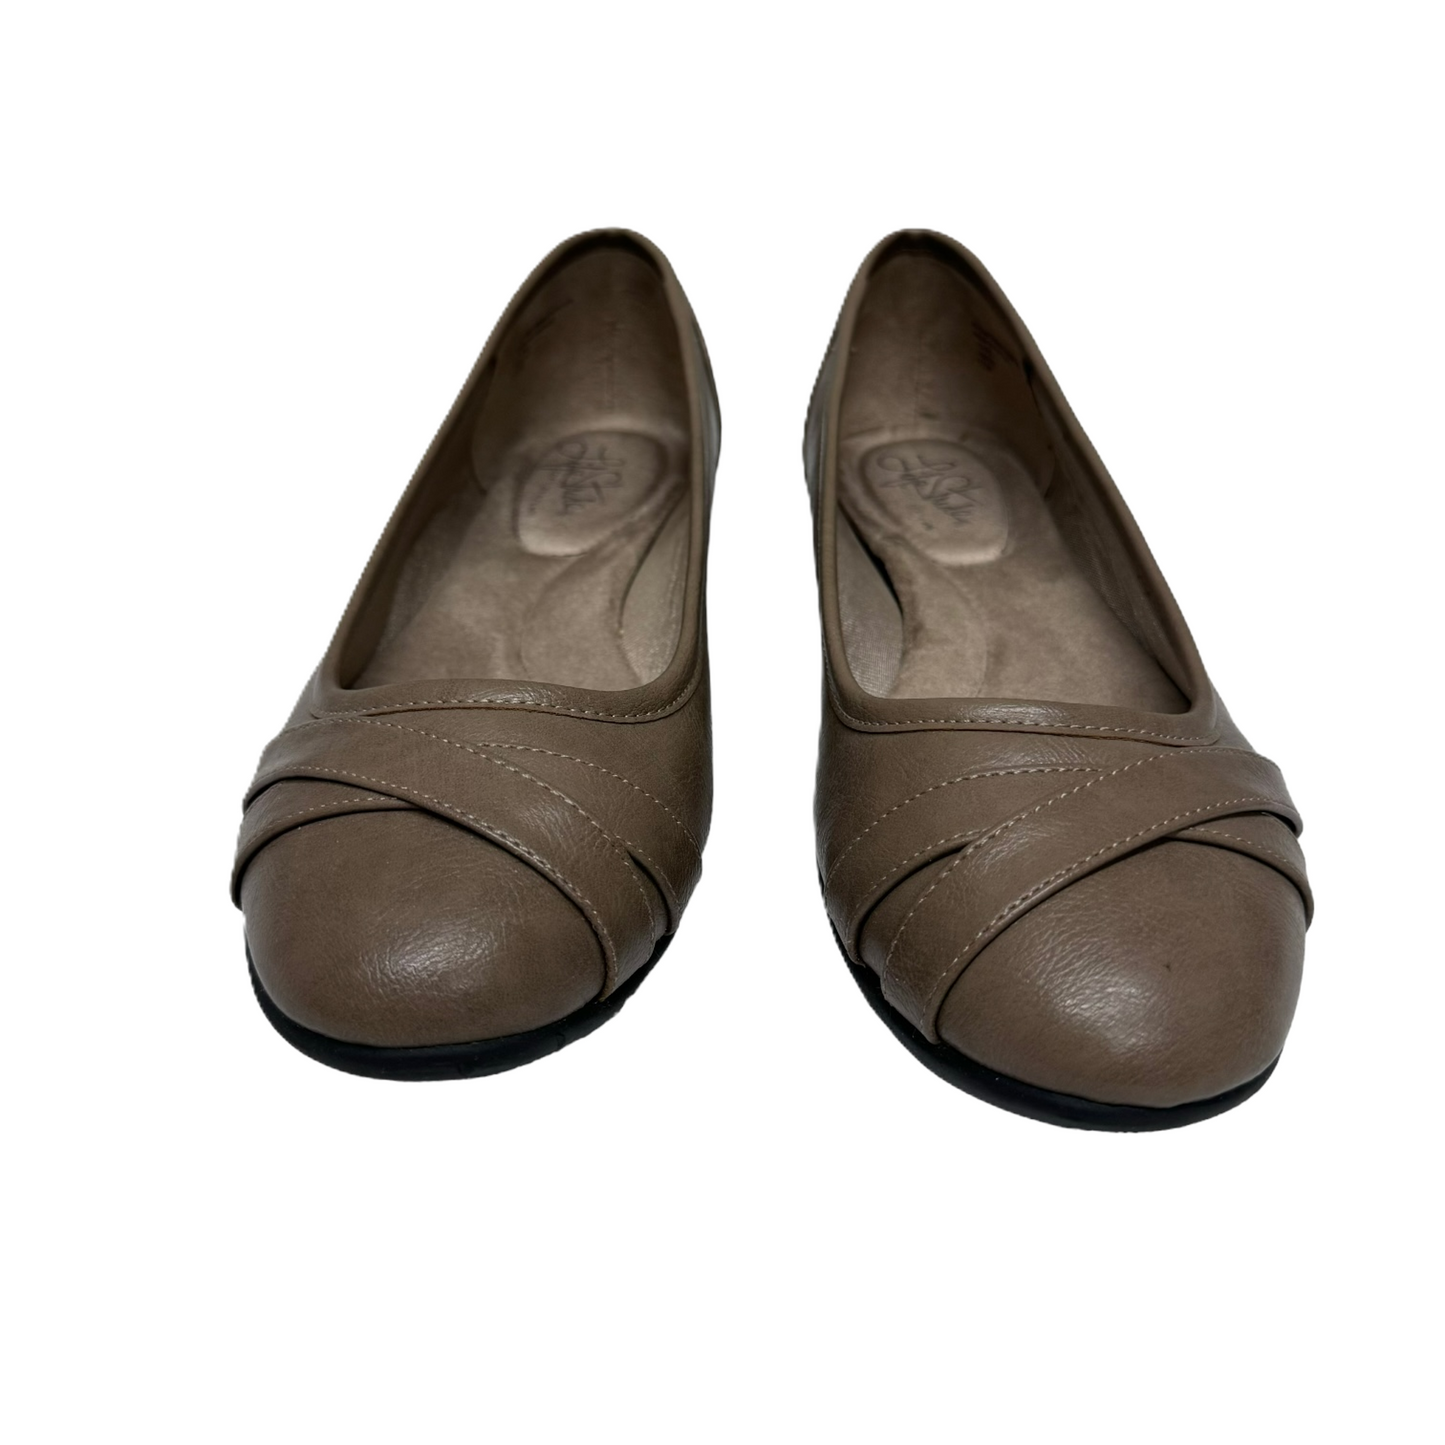 Shoes Flats By Life Stride  Size: 10